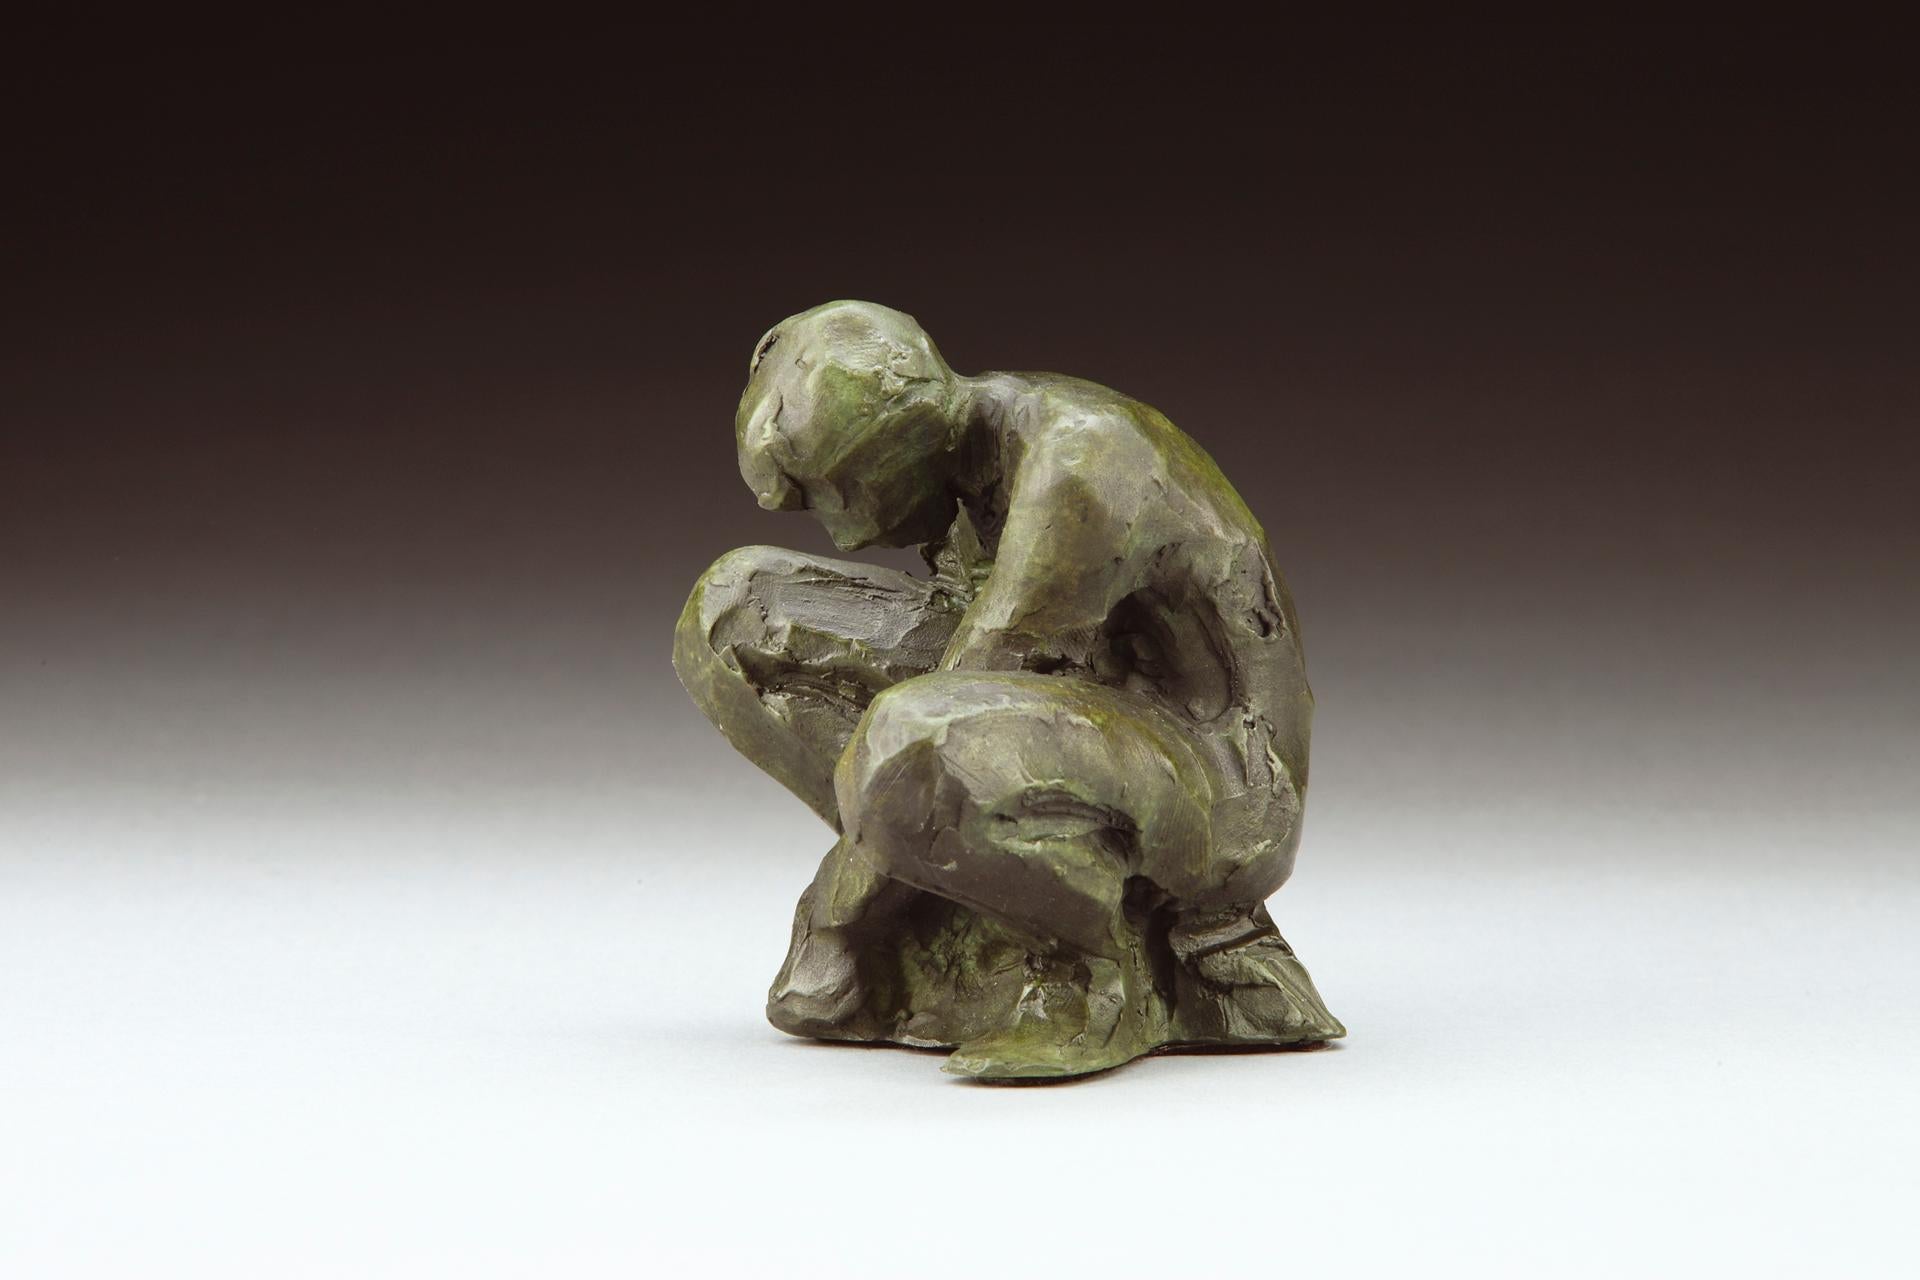 Searching by Jane DeDecker
Abstract Figurative Bronze study
3.5x3.5x3